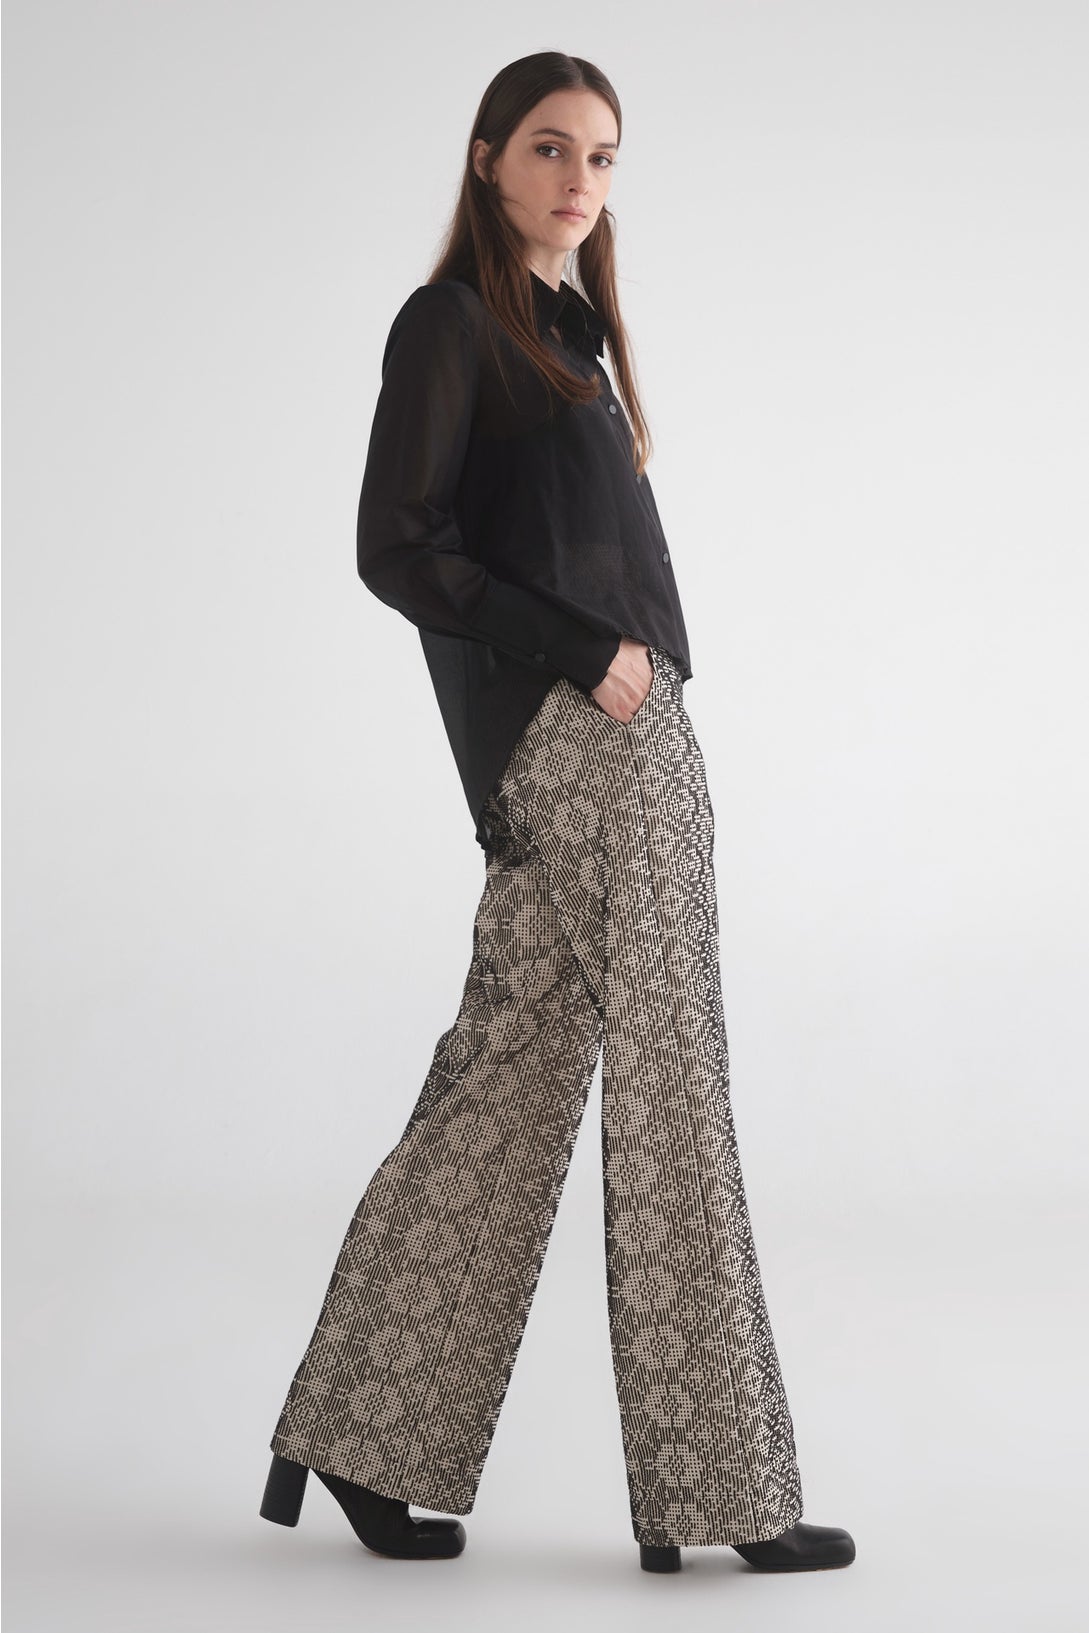 ZARA NEW WOMAN Limited Edition Printed Trousers Wide-Leg Pant Xs-L